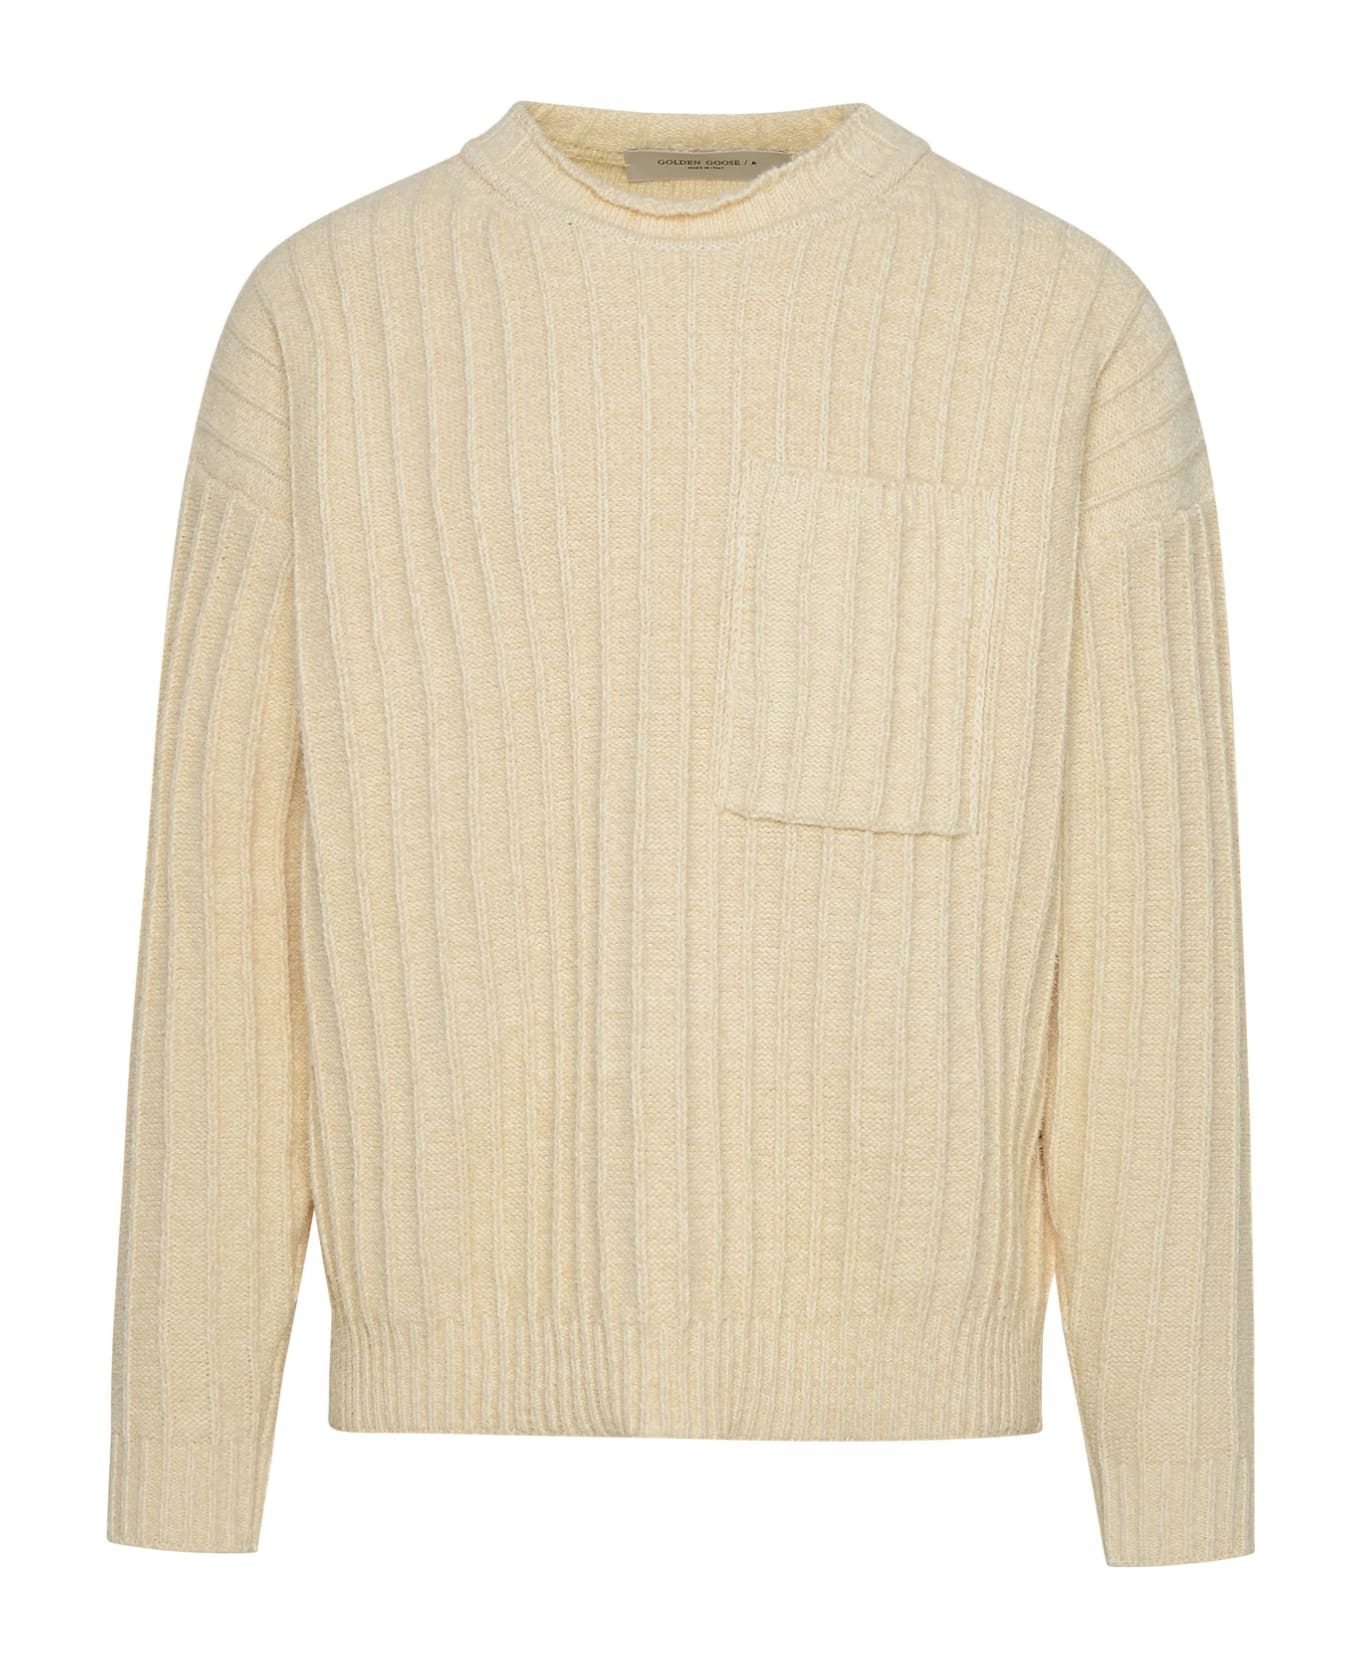 Golden Goose Ivory Cotton Ribbed Sweater - Beige